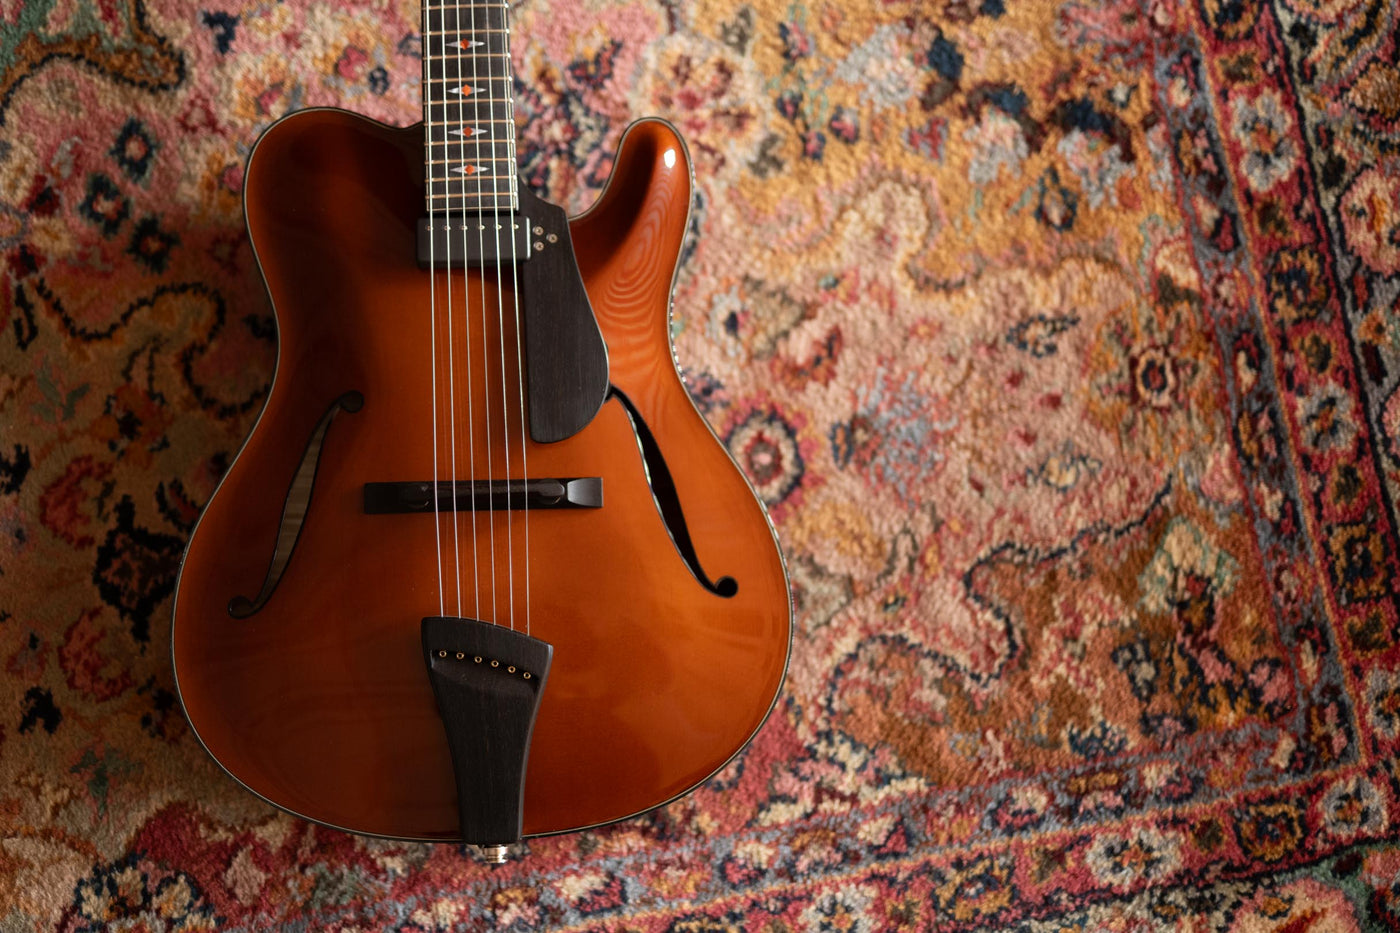 Pre-Owned Archtop Guitars